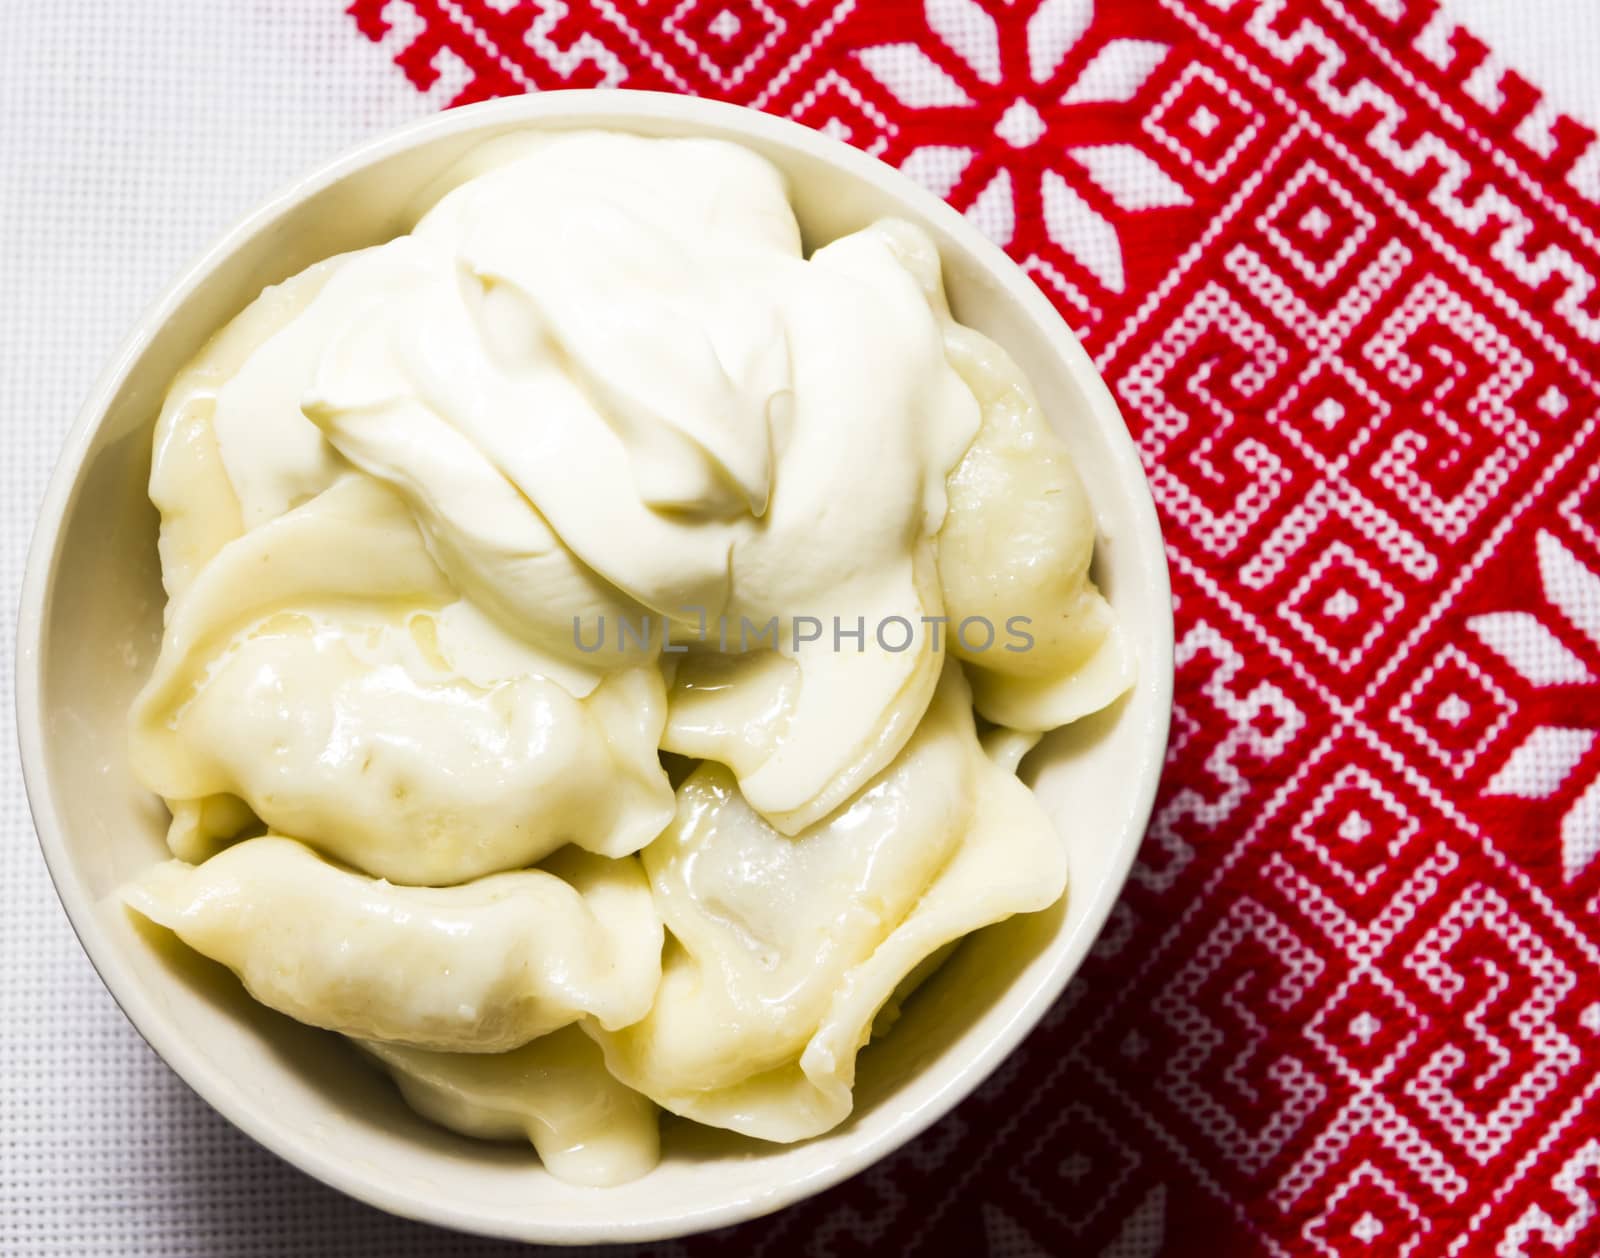 Dumplings with sour cream on the Ukrainian embroidered towel